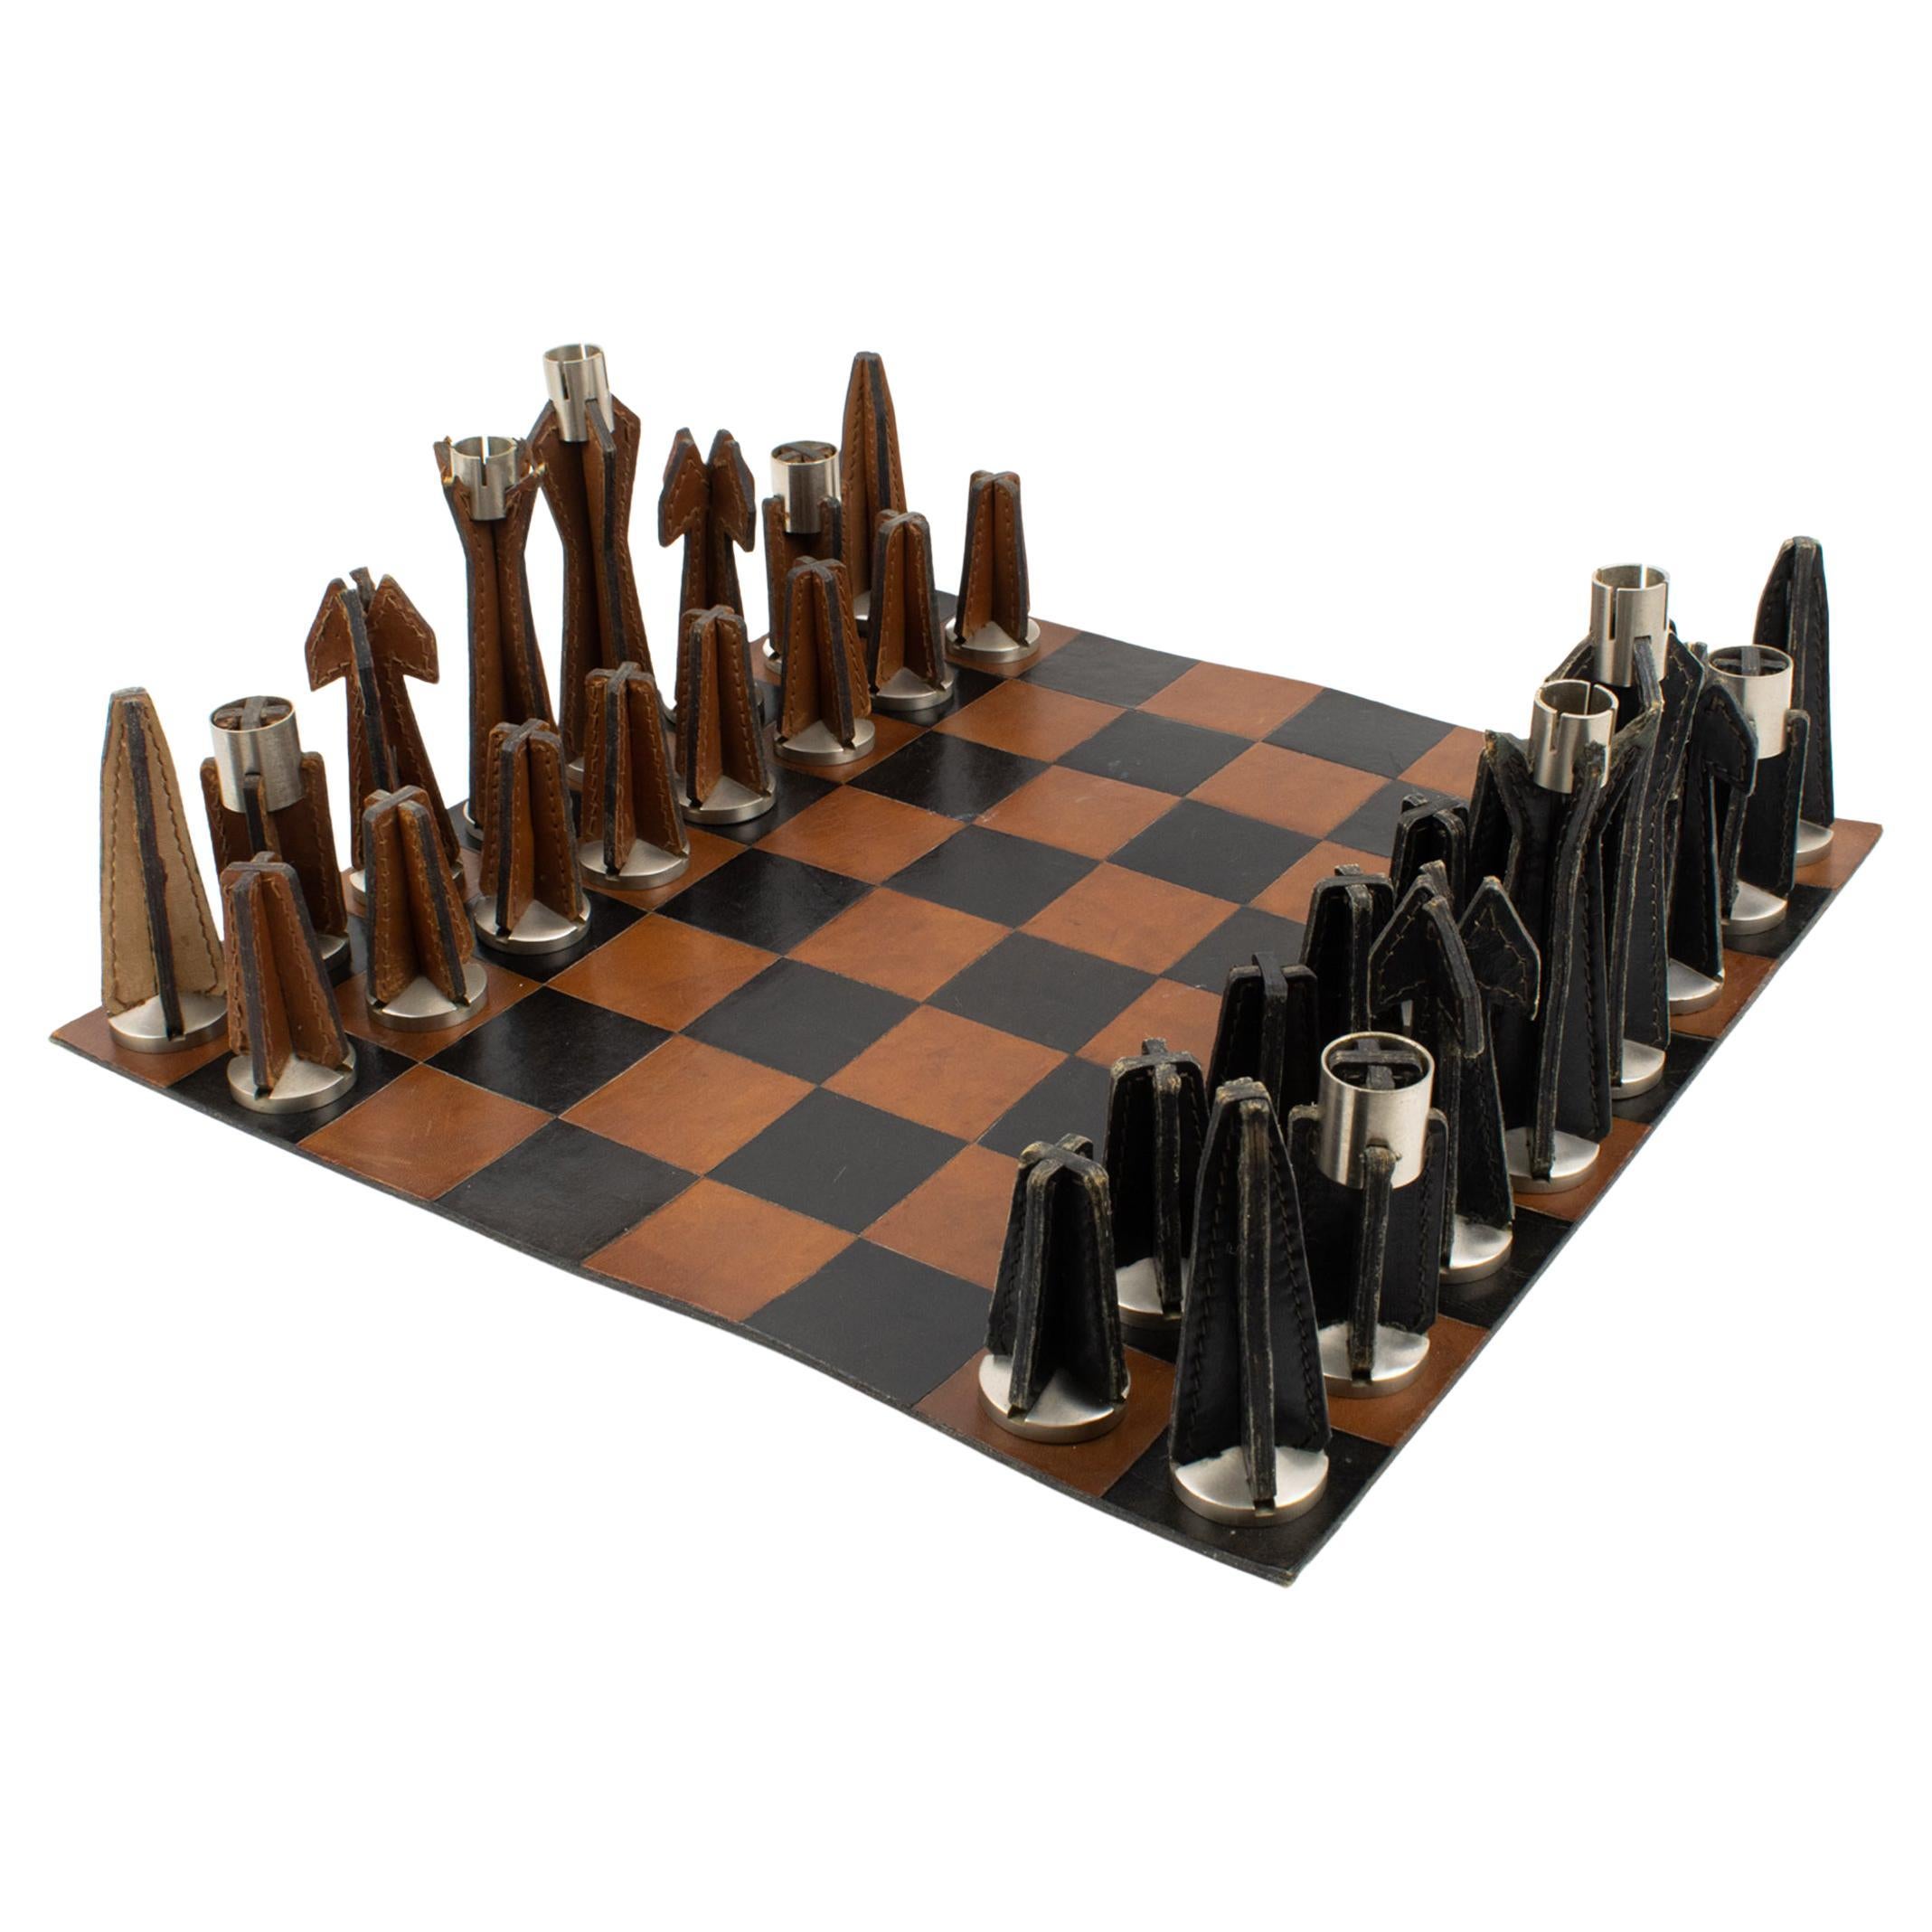 Jacques Adnet Hand-Stitched Black and Cognac Leather Chess Board and Set